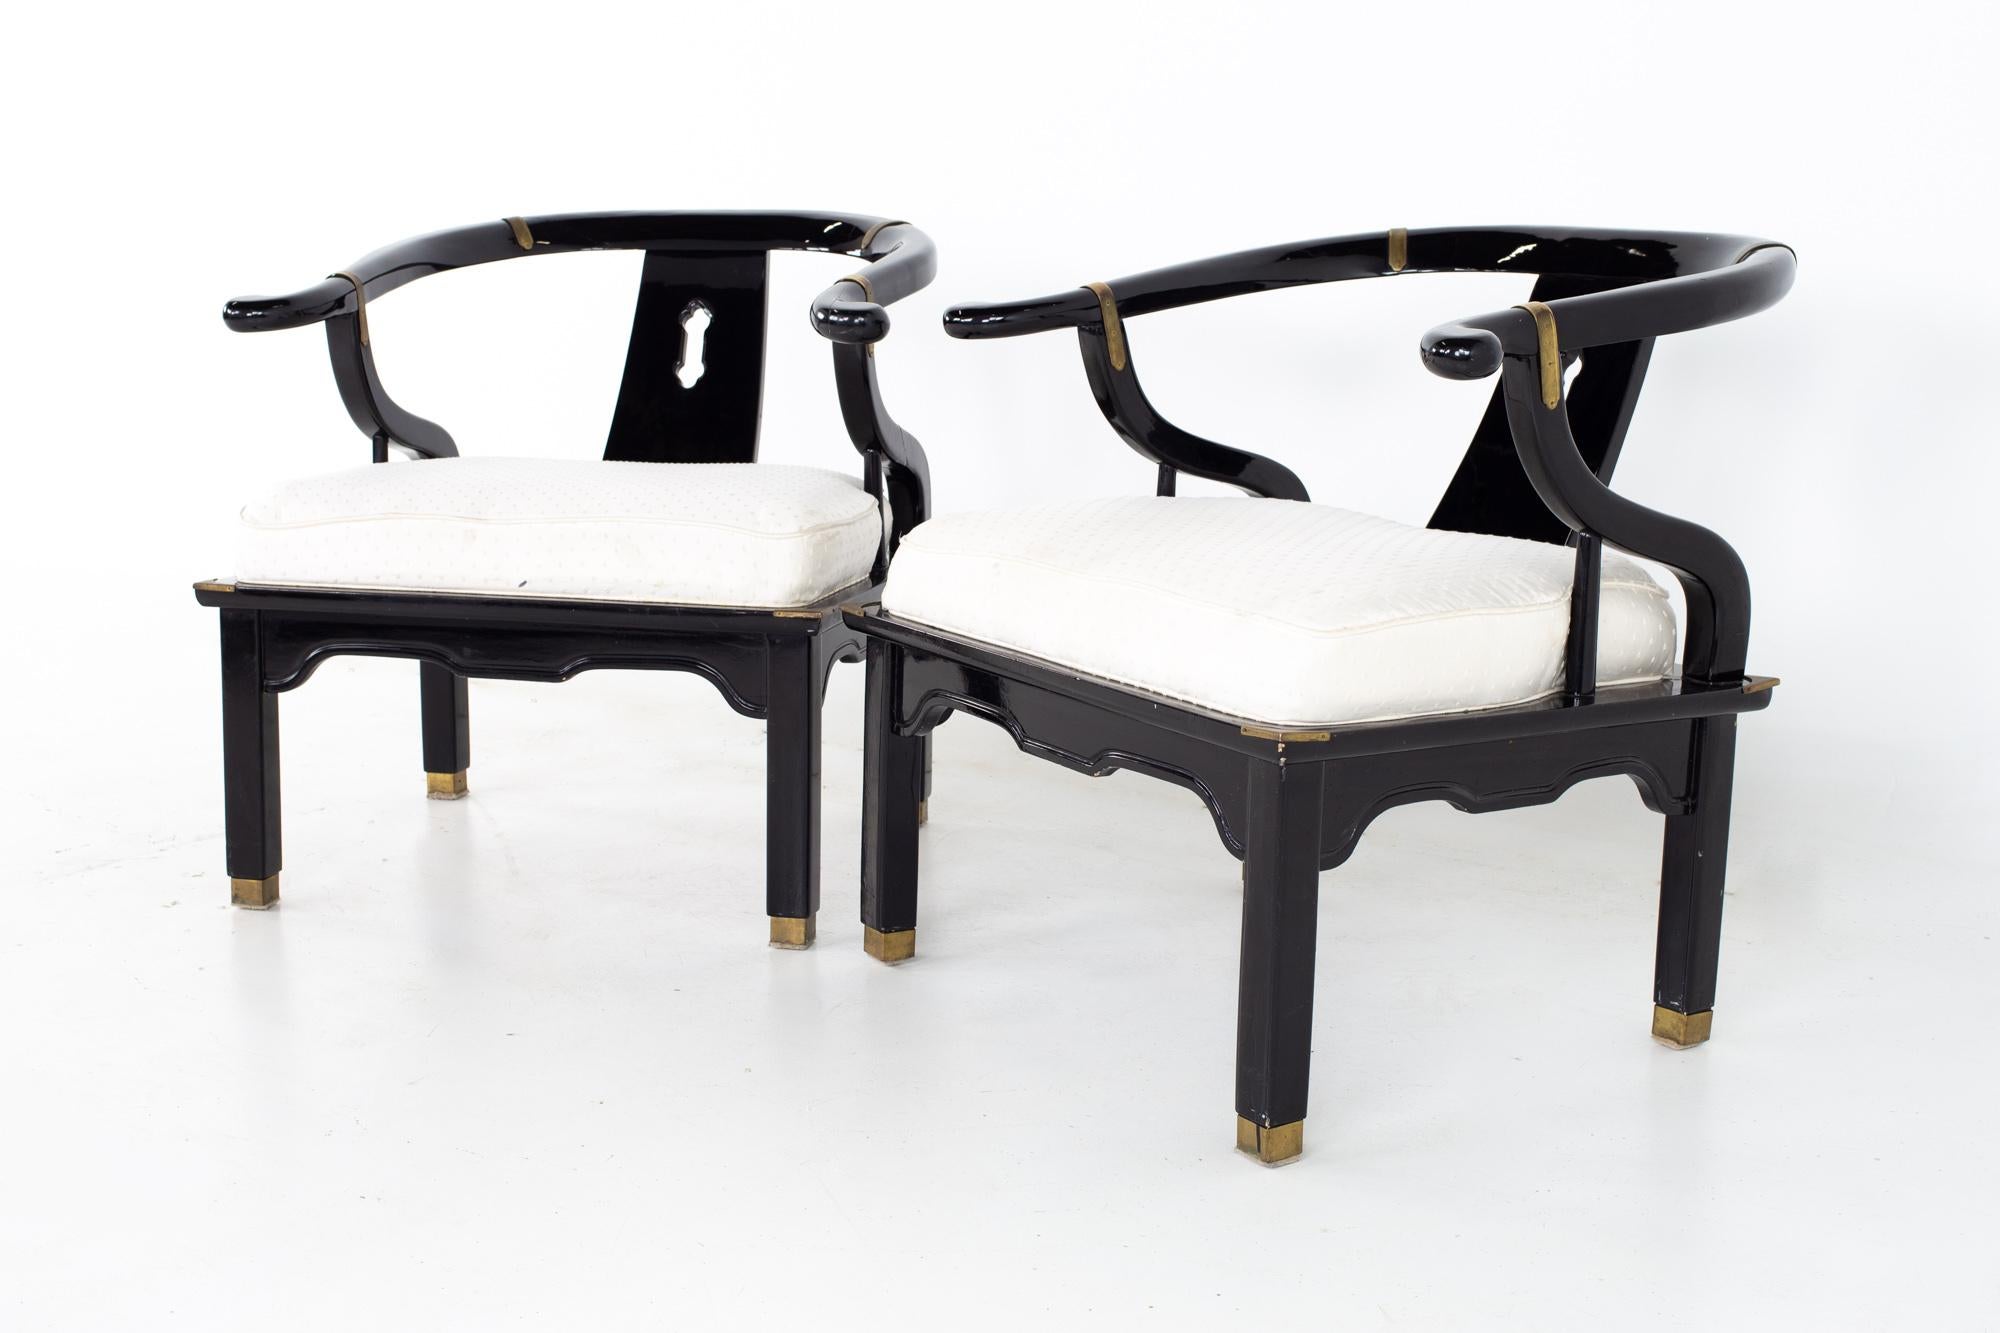 Chinoiserie Ming style Baker Furniture mid century brass and black lacquer occasional lounge chairs - a pair
Lounge chair measures: 27.25 wide x 24 deep x 29 high, with a seat height of 17 inches and arm height of 27

All pieces of furniture can